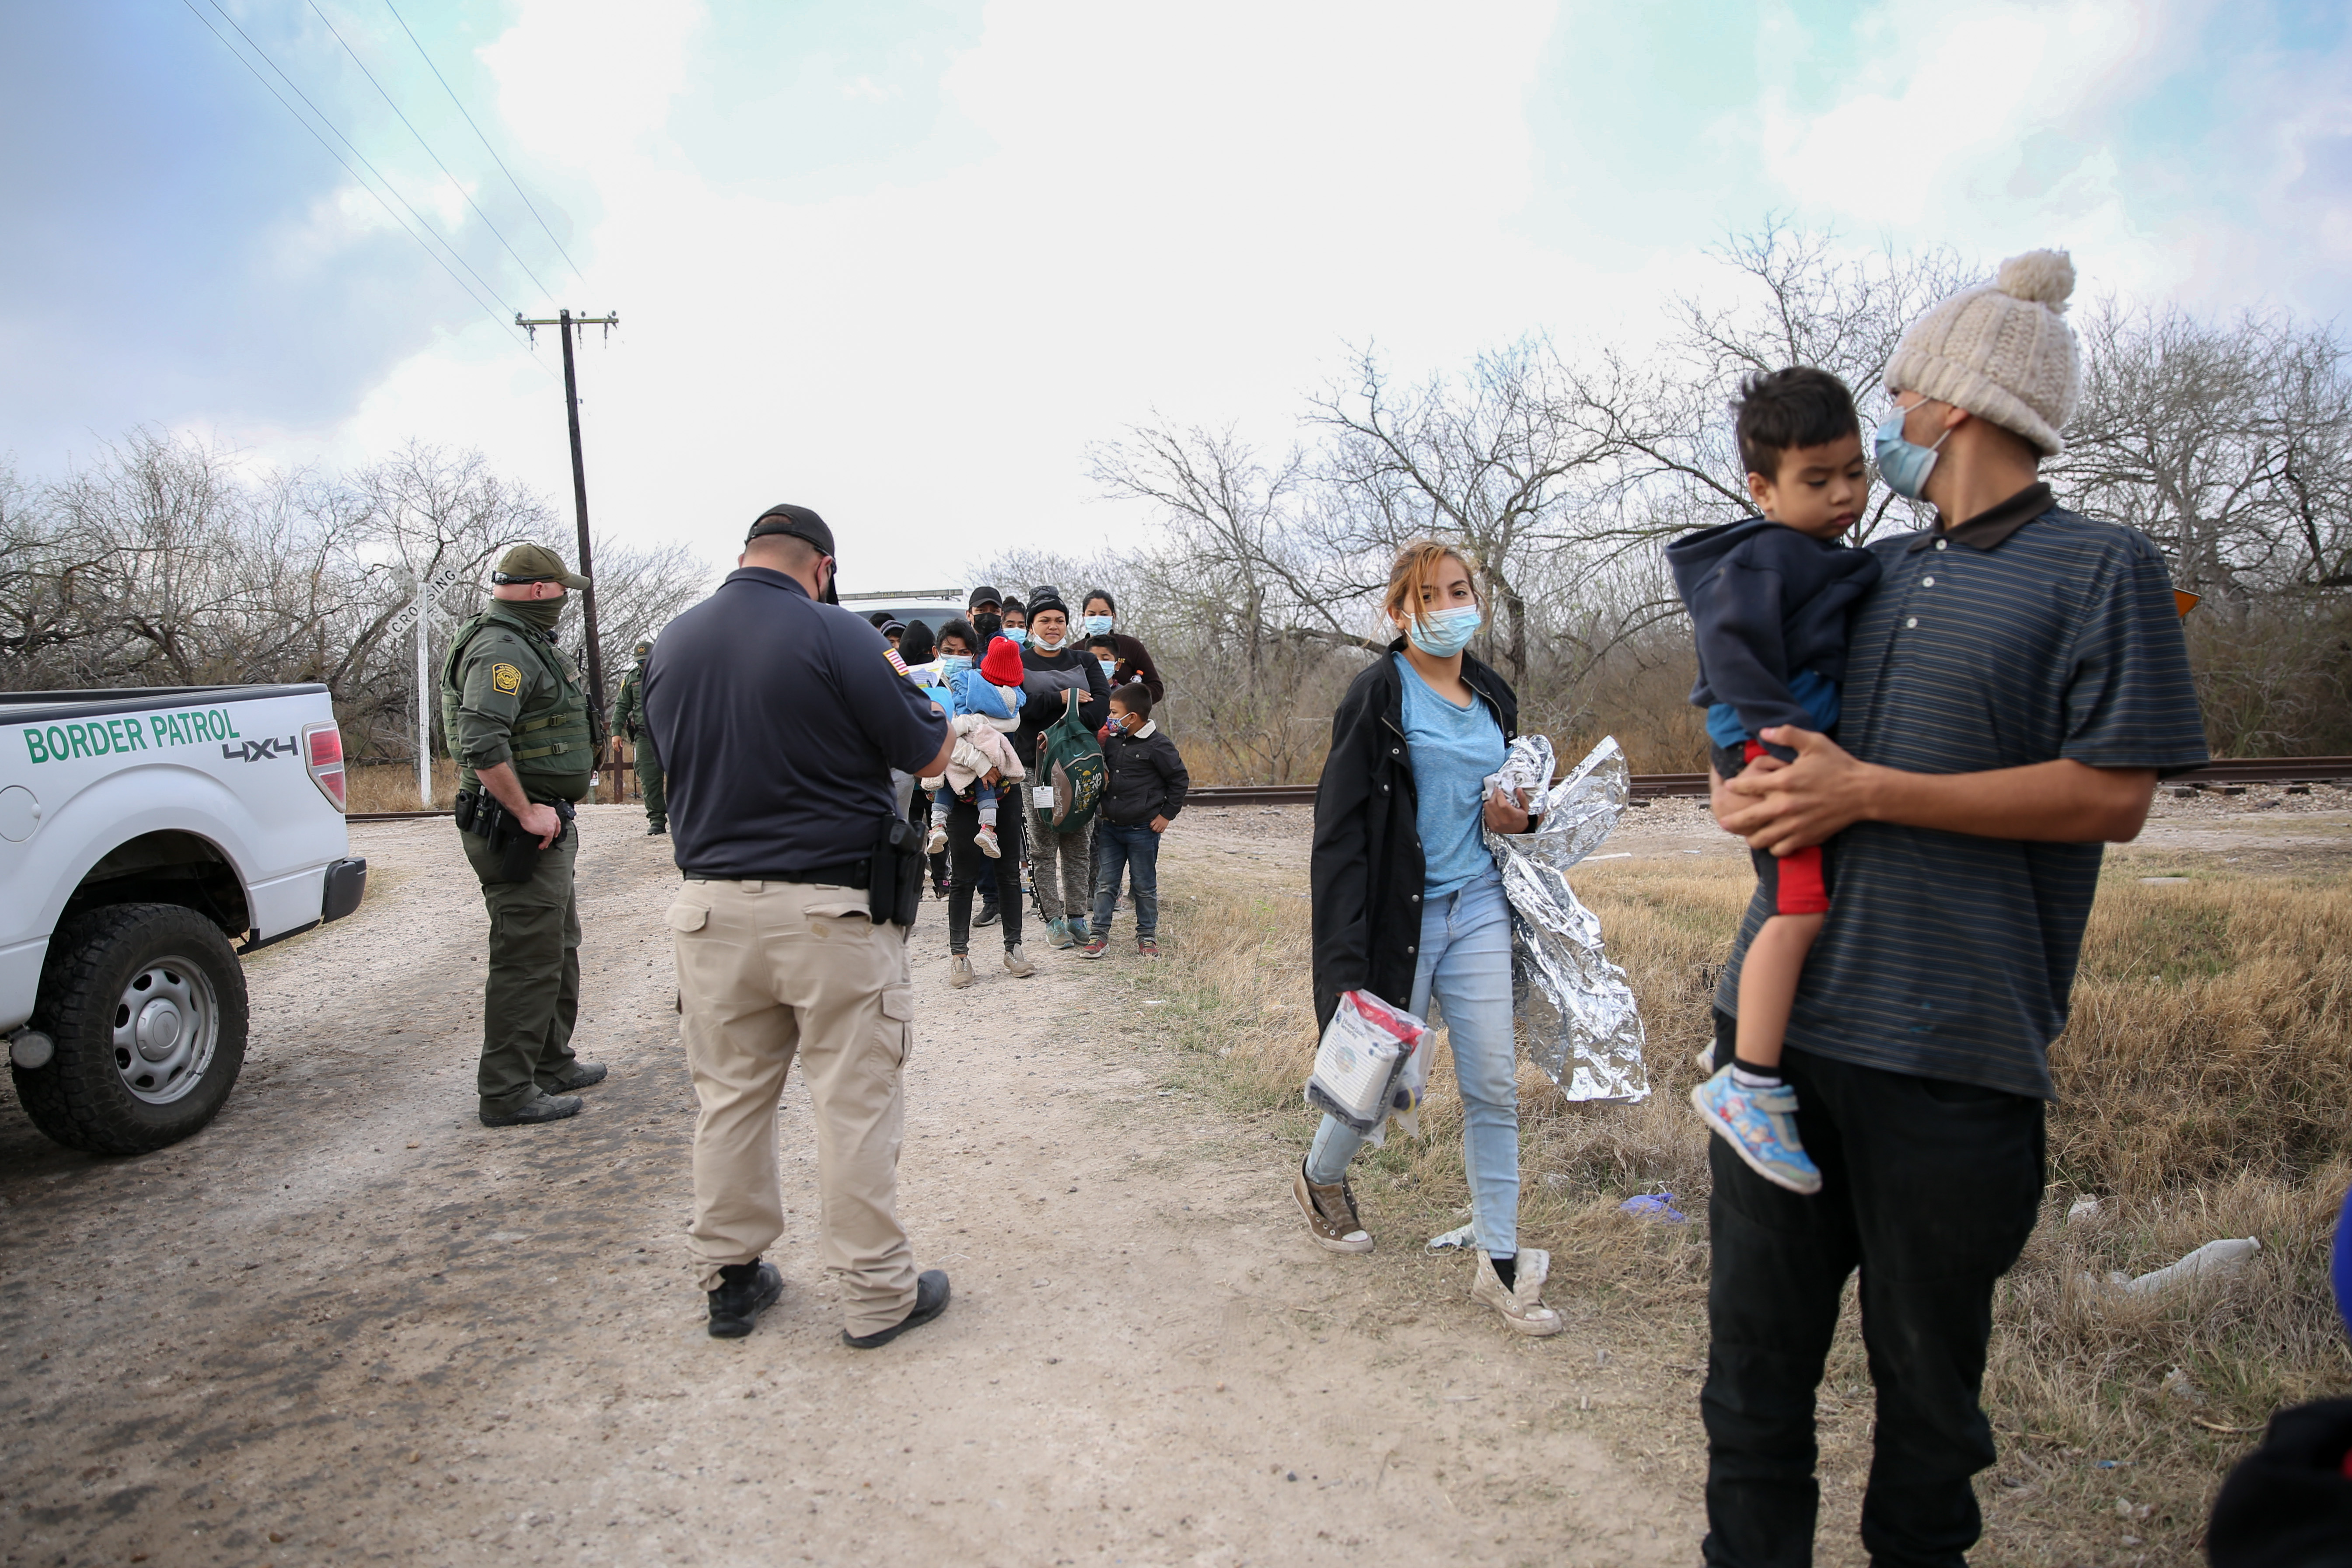 Illegal Border Crossings Jump to 150,000 in March